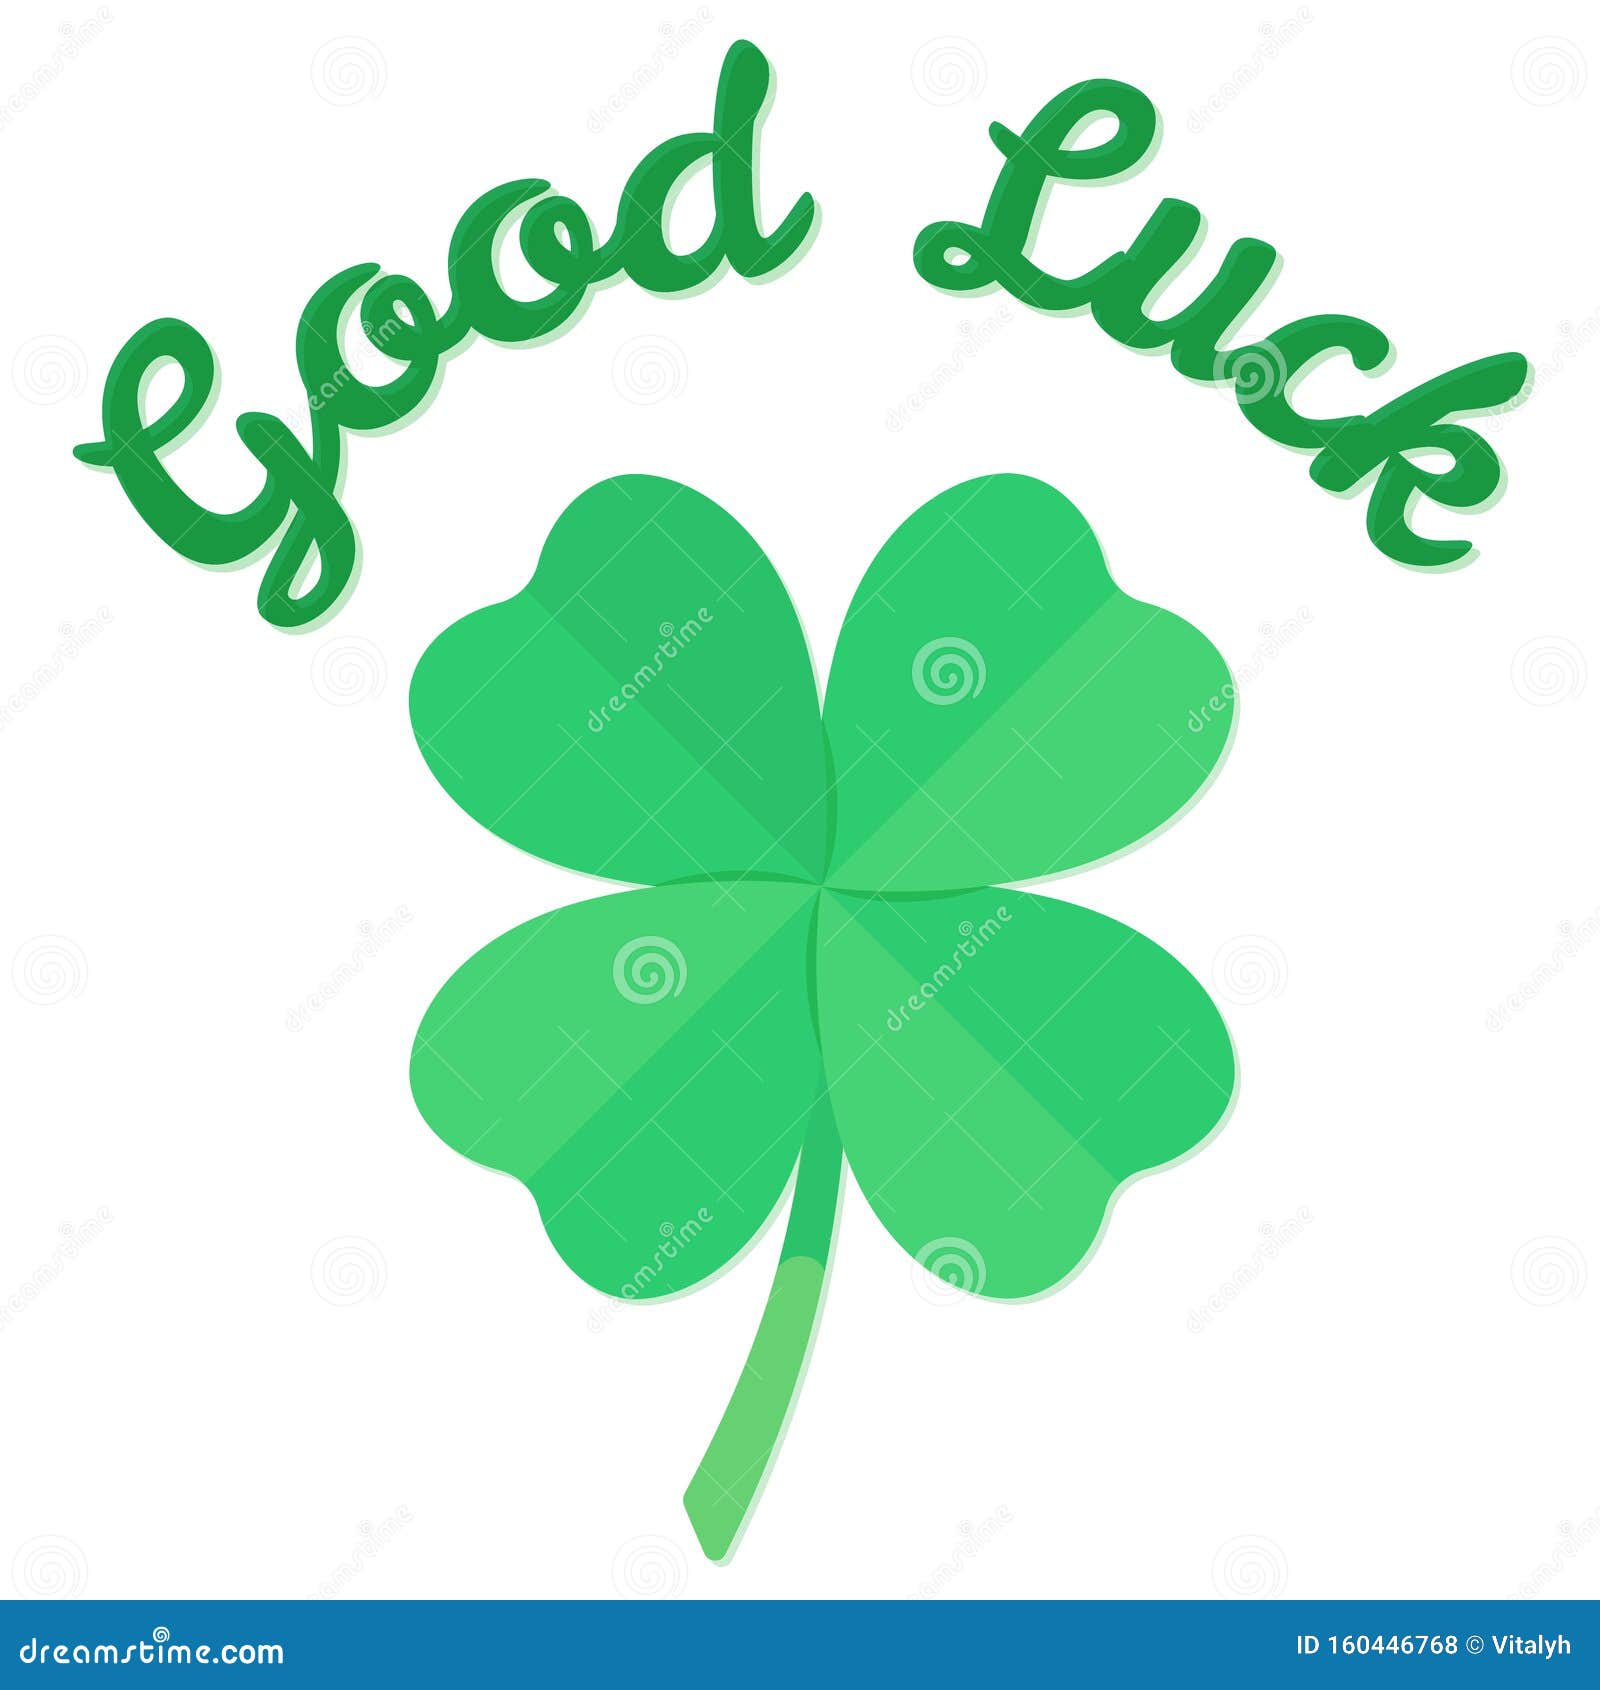 https://thumbs.dreamstime.com/z/four-leaf-green-lucky-clover-text-good-luck-flat-vector-illustration-happy-st-patrick-s-day-luck-irish-four-leaf-green-160446768.jpg